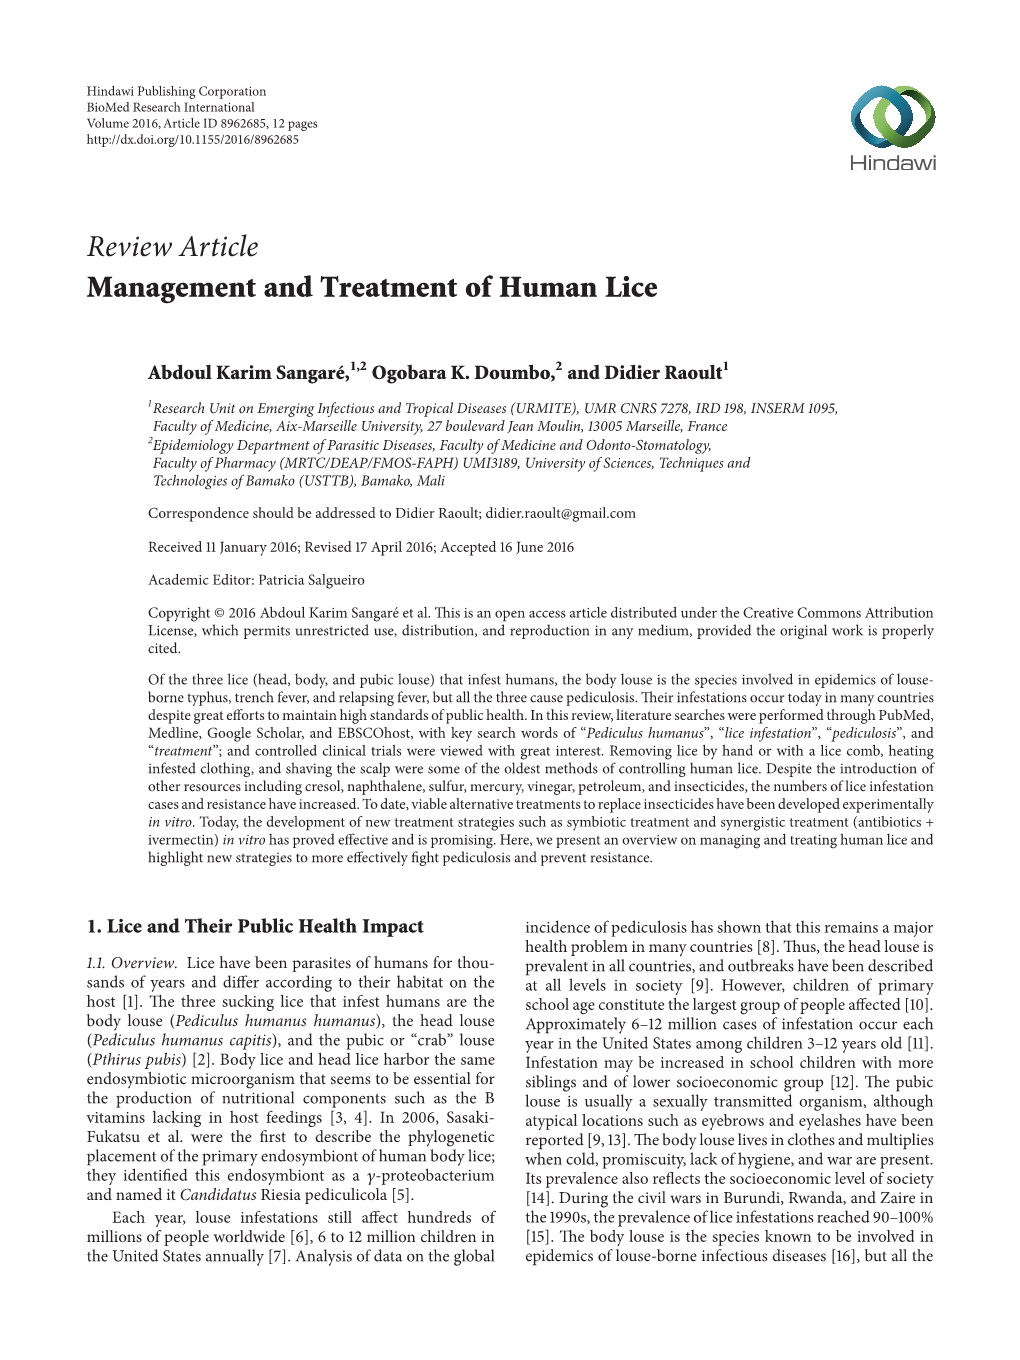 Management and Treatment of Human Lice